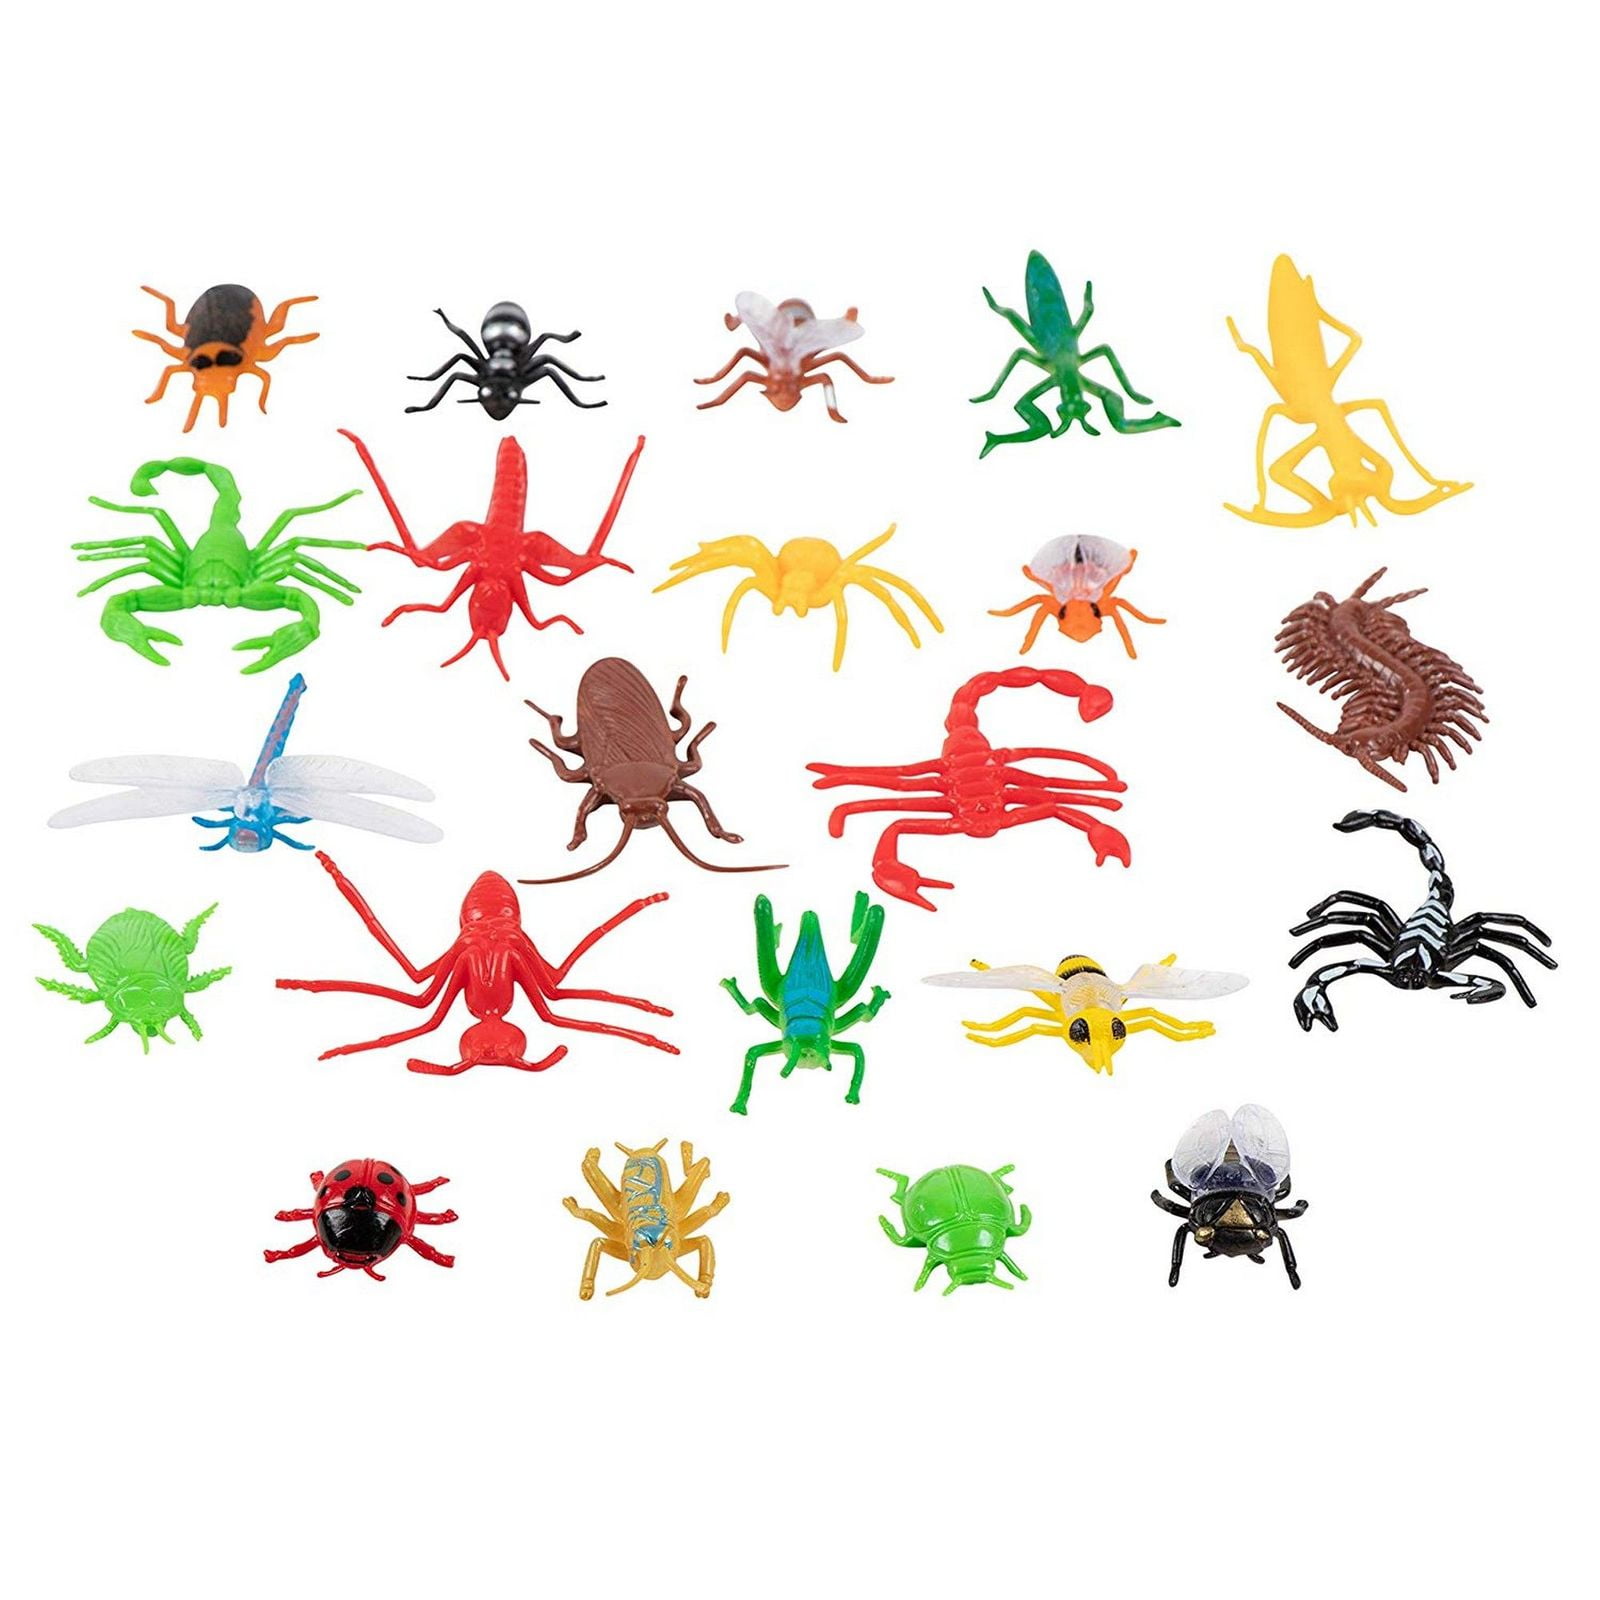 Pack of 6 Plastic Insects Bug Self Ink Stampers Great Party Bag Fillers 